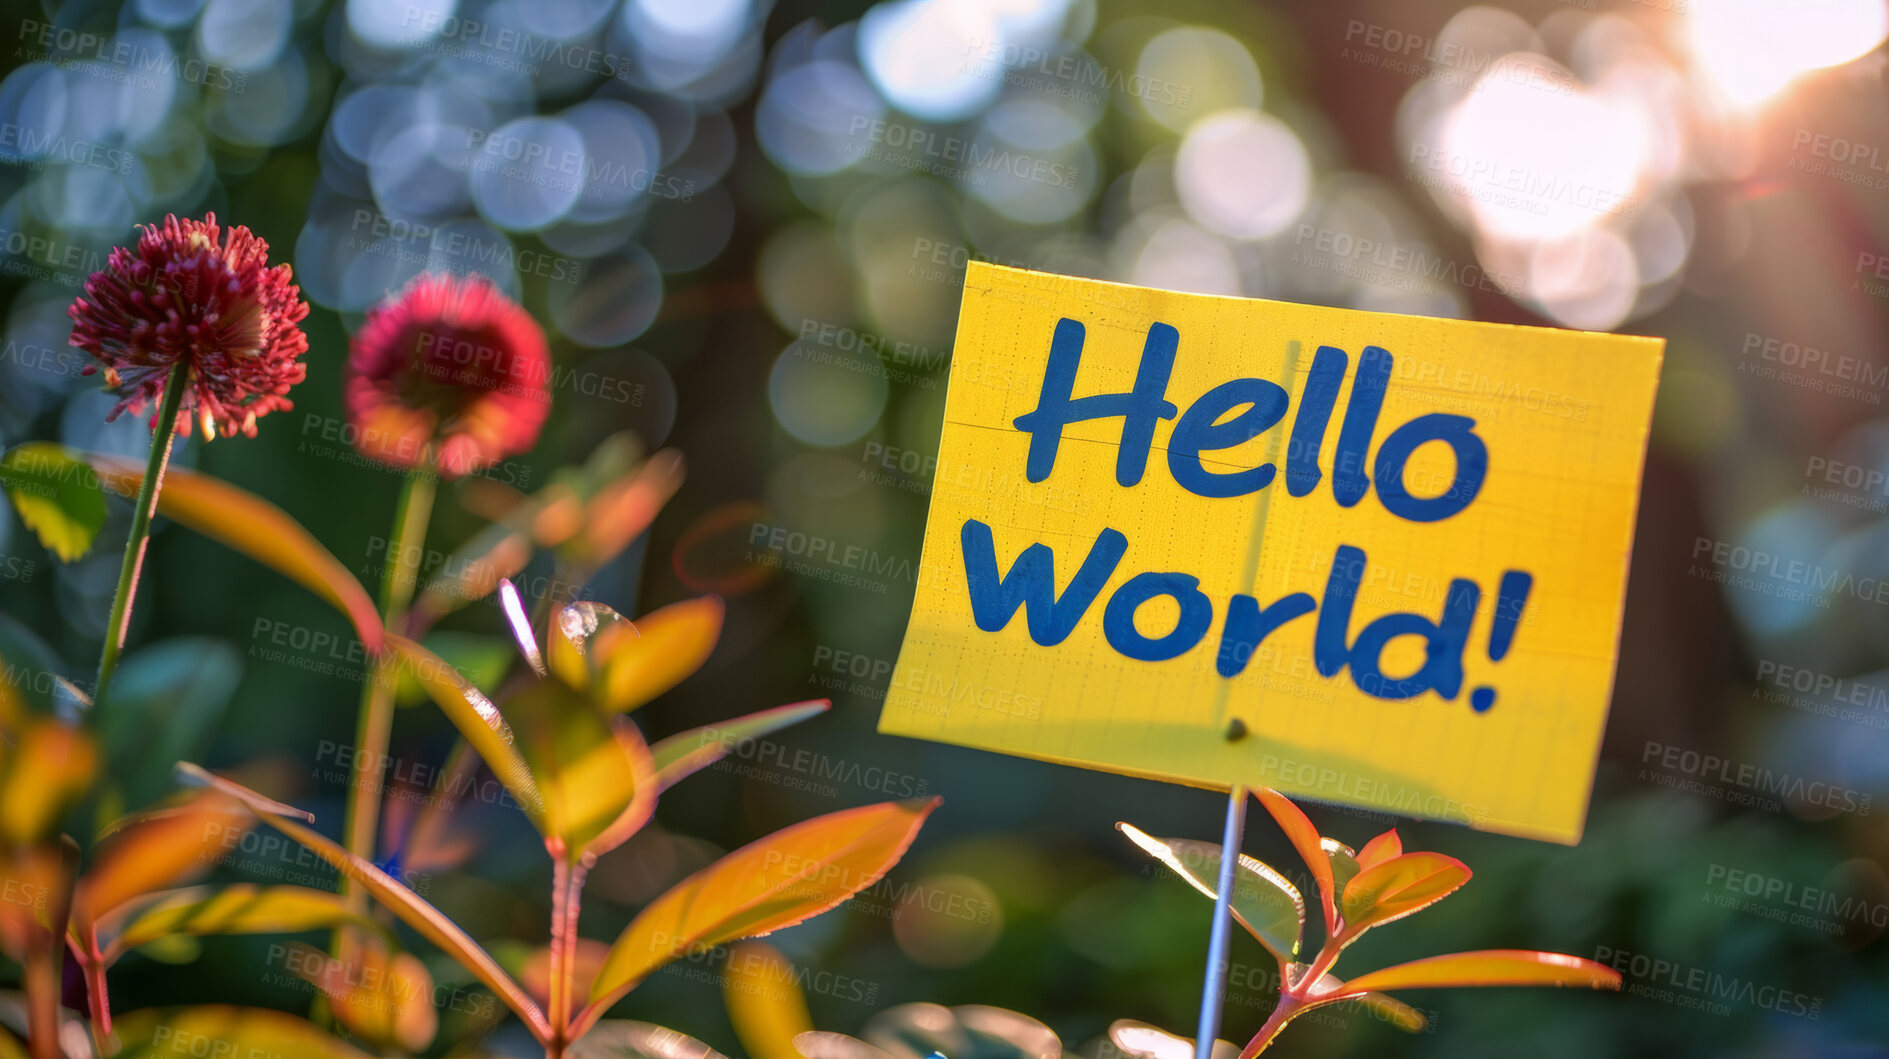 Buy stock photo Earth day, garden and hello world with sign for botany, growth or sustainability of nature in spring. Environment, flowers and plants outdoor in backyard or park for conservation or natural ecology